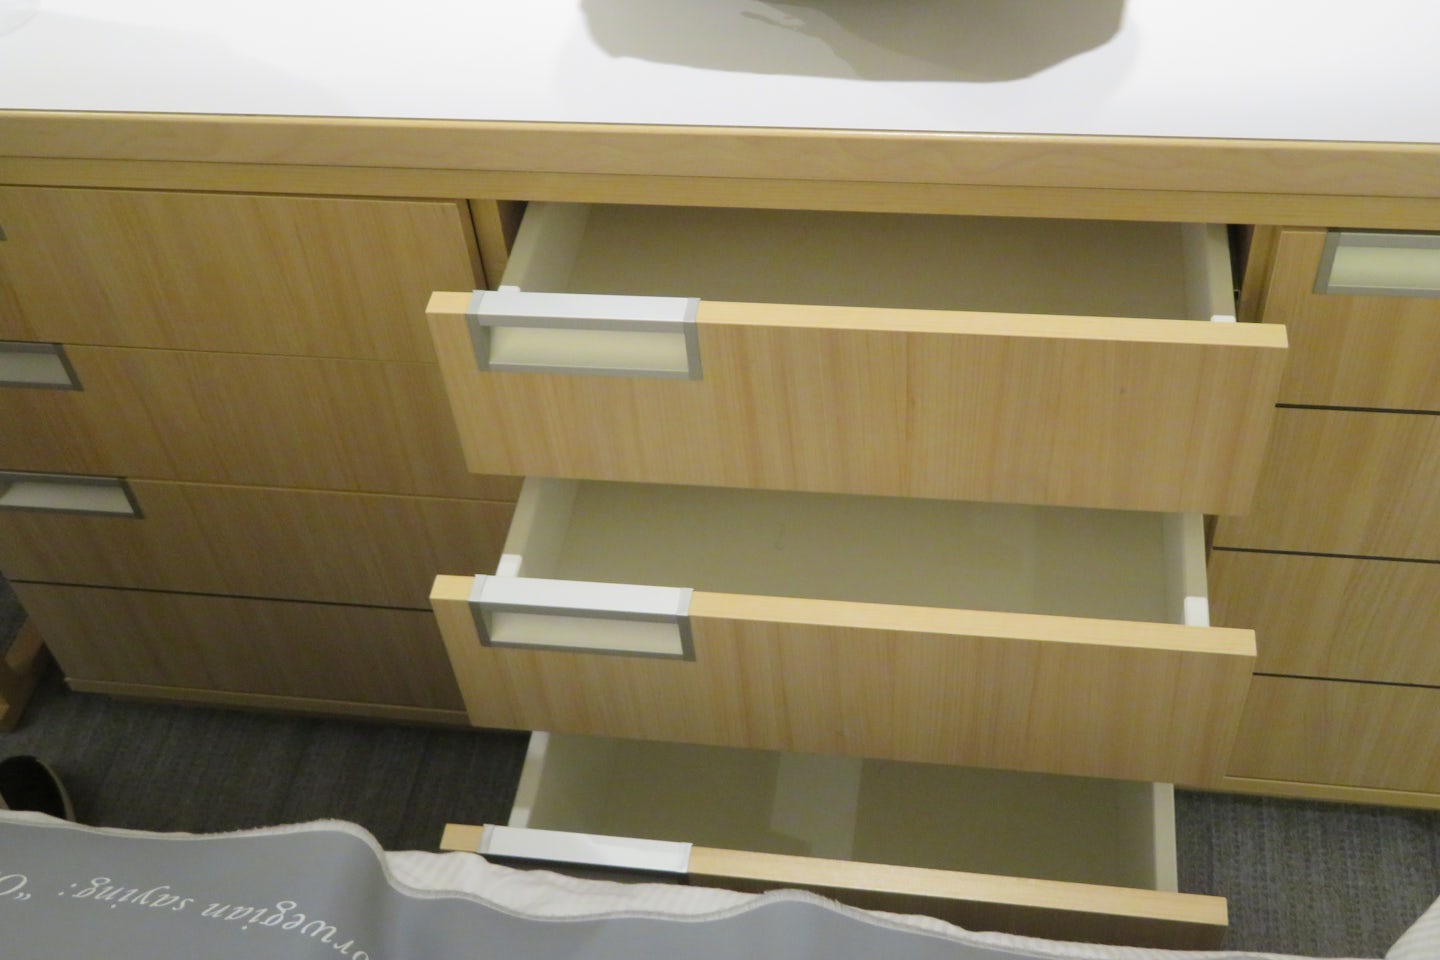 Six drawer, the bottom is double deep